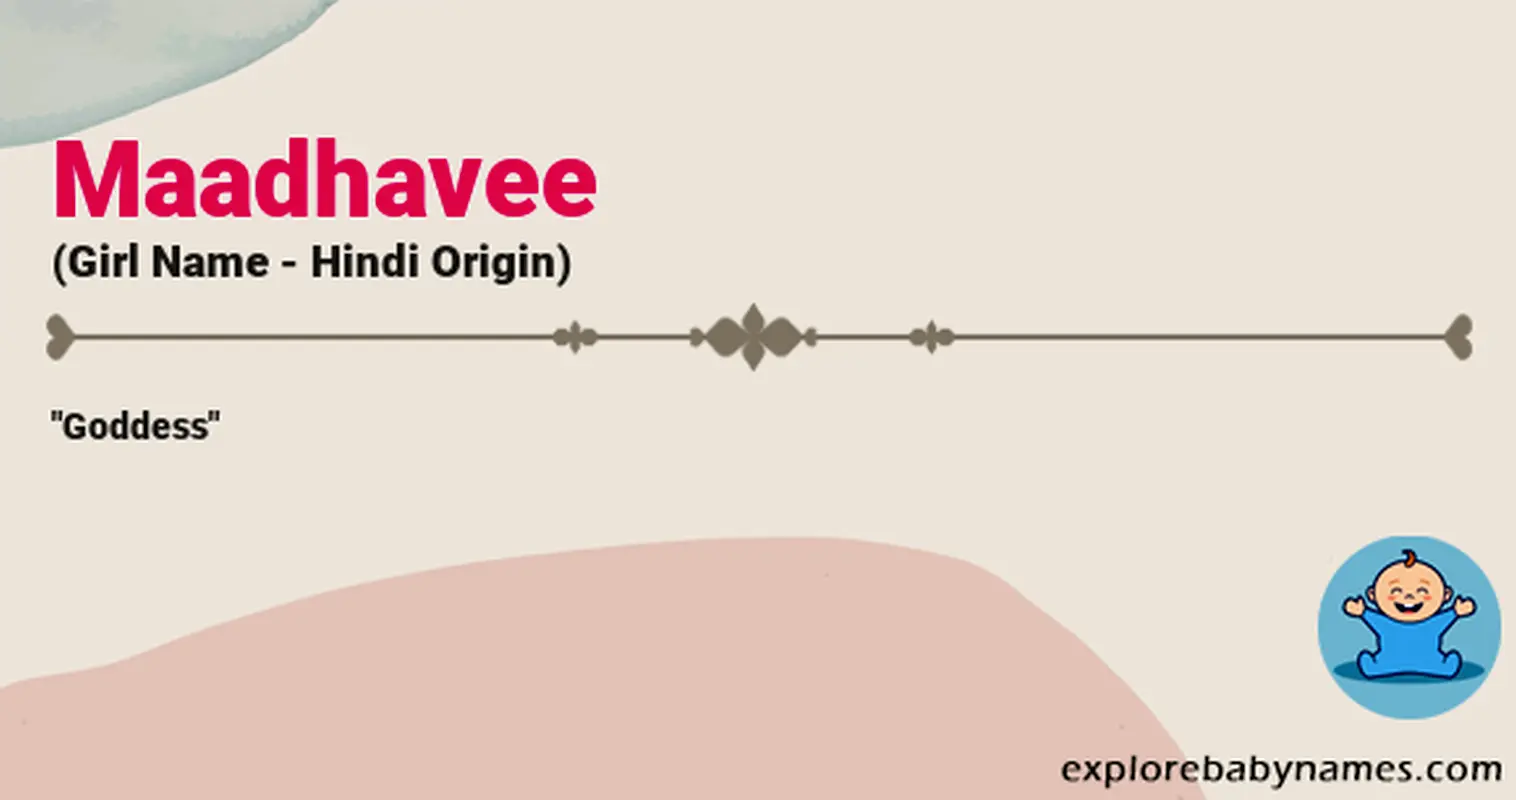 Meaning of Maadhavee